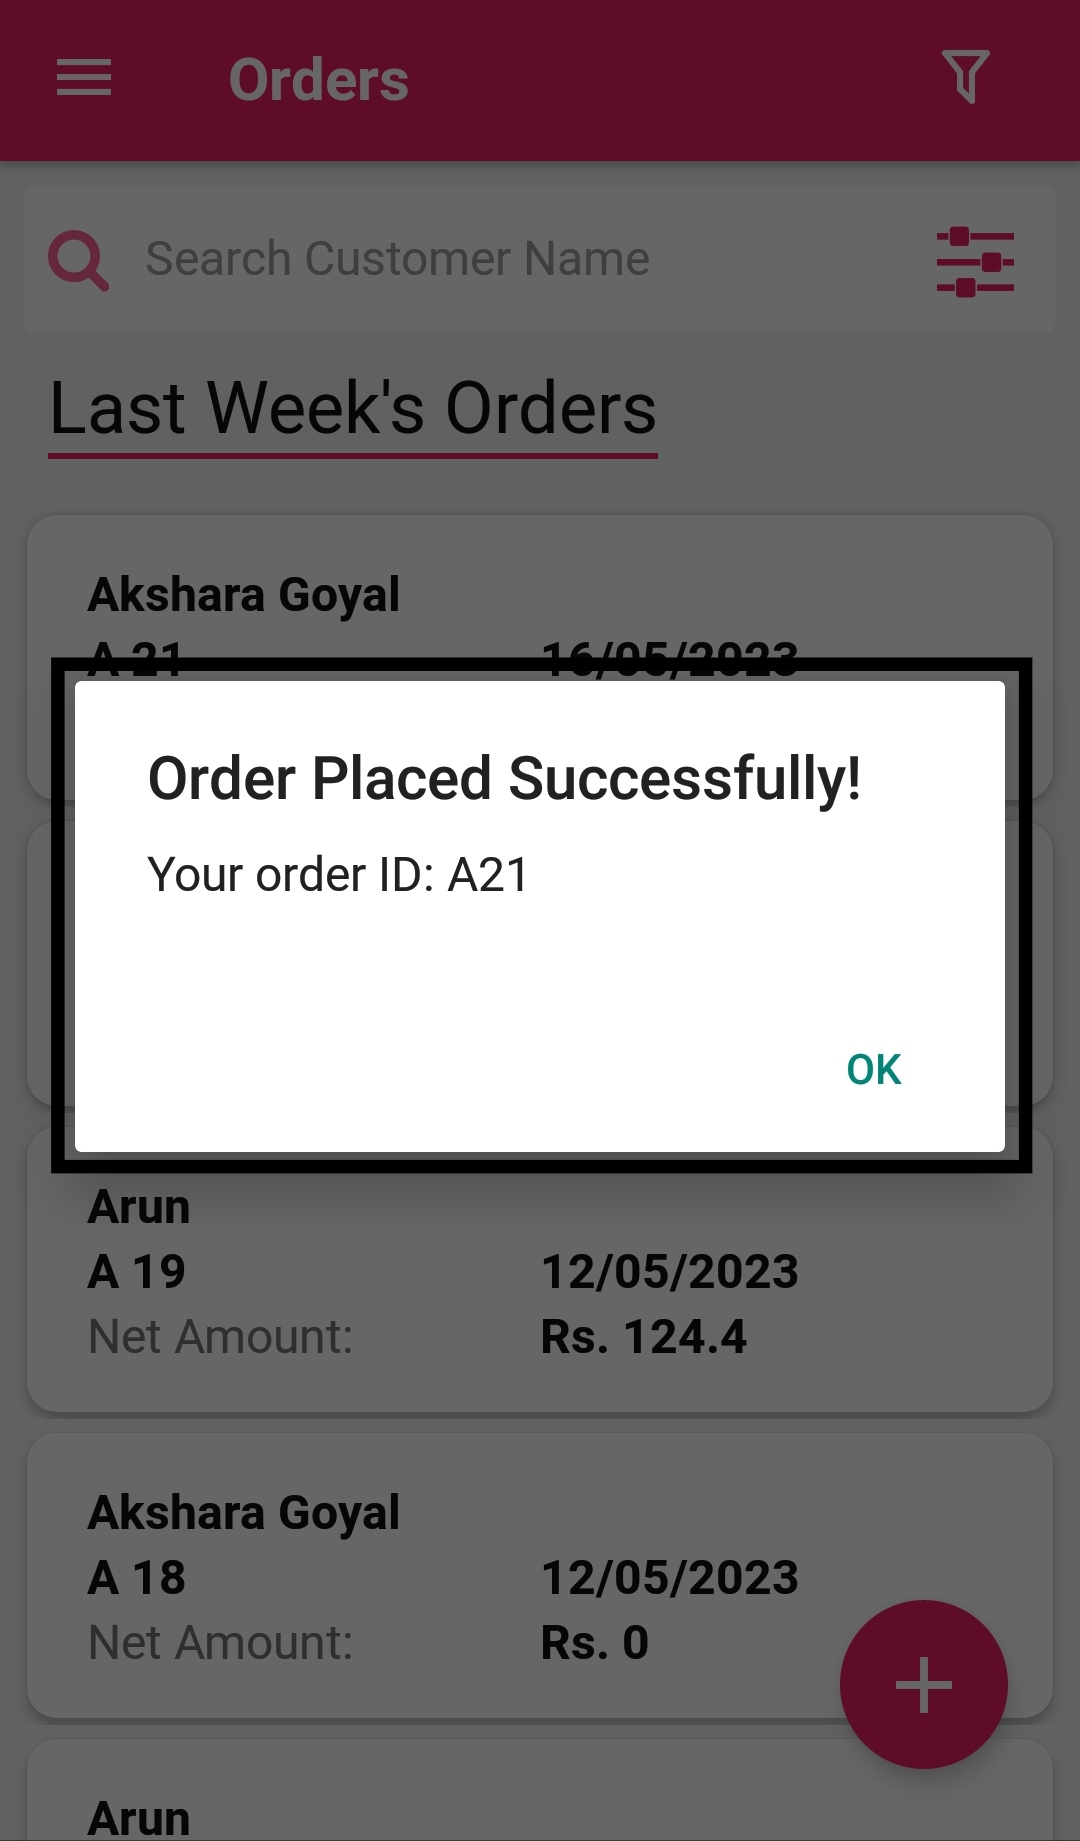 Confirmation popup in SWILPOS app displaying a successful order placement with the order ID provided